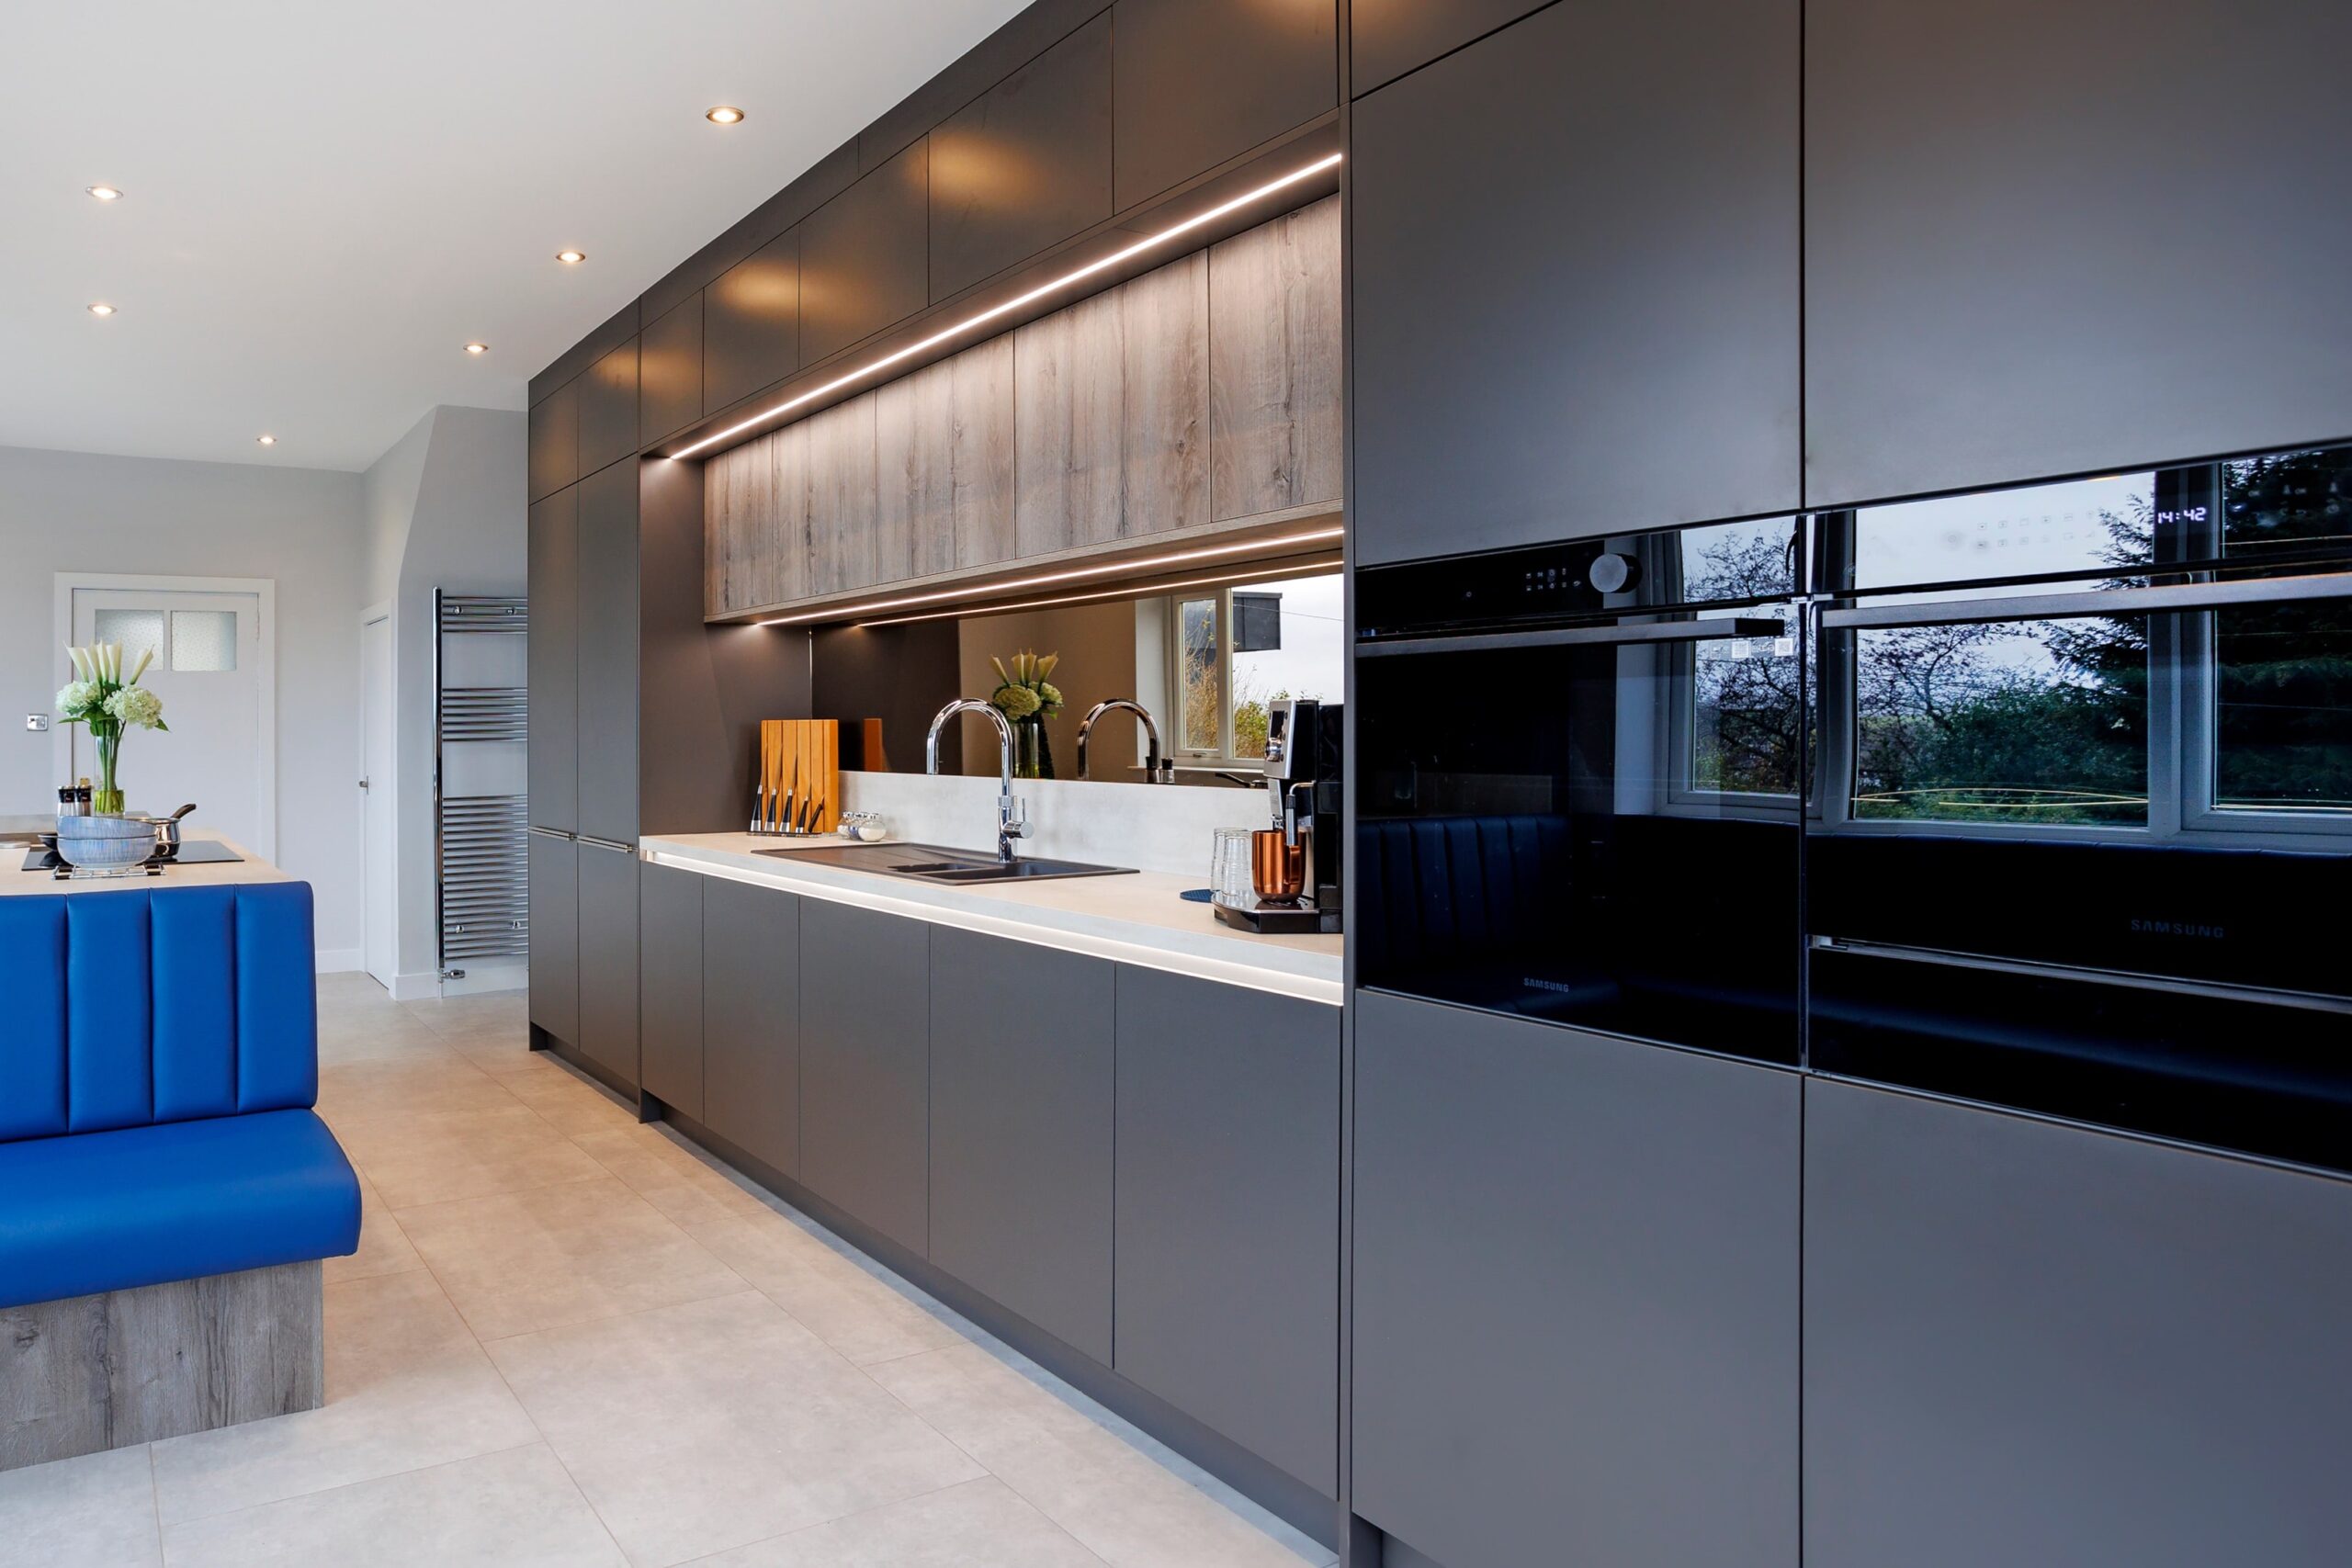 Grey kitchen cabinets featuring a white worktop space and integrated ovens